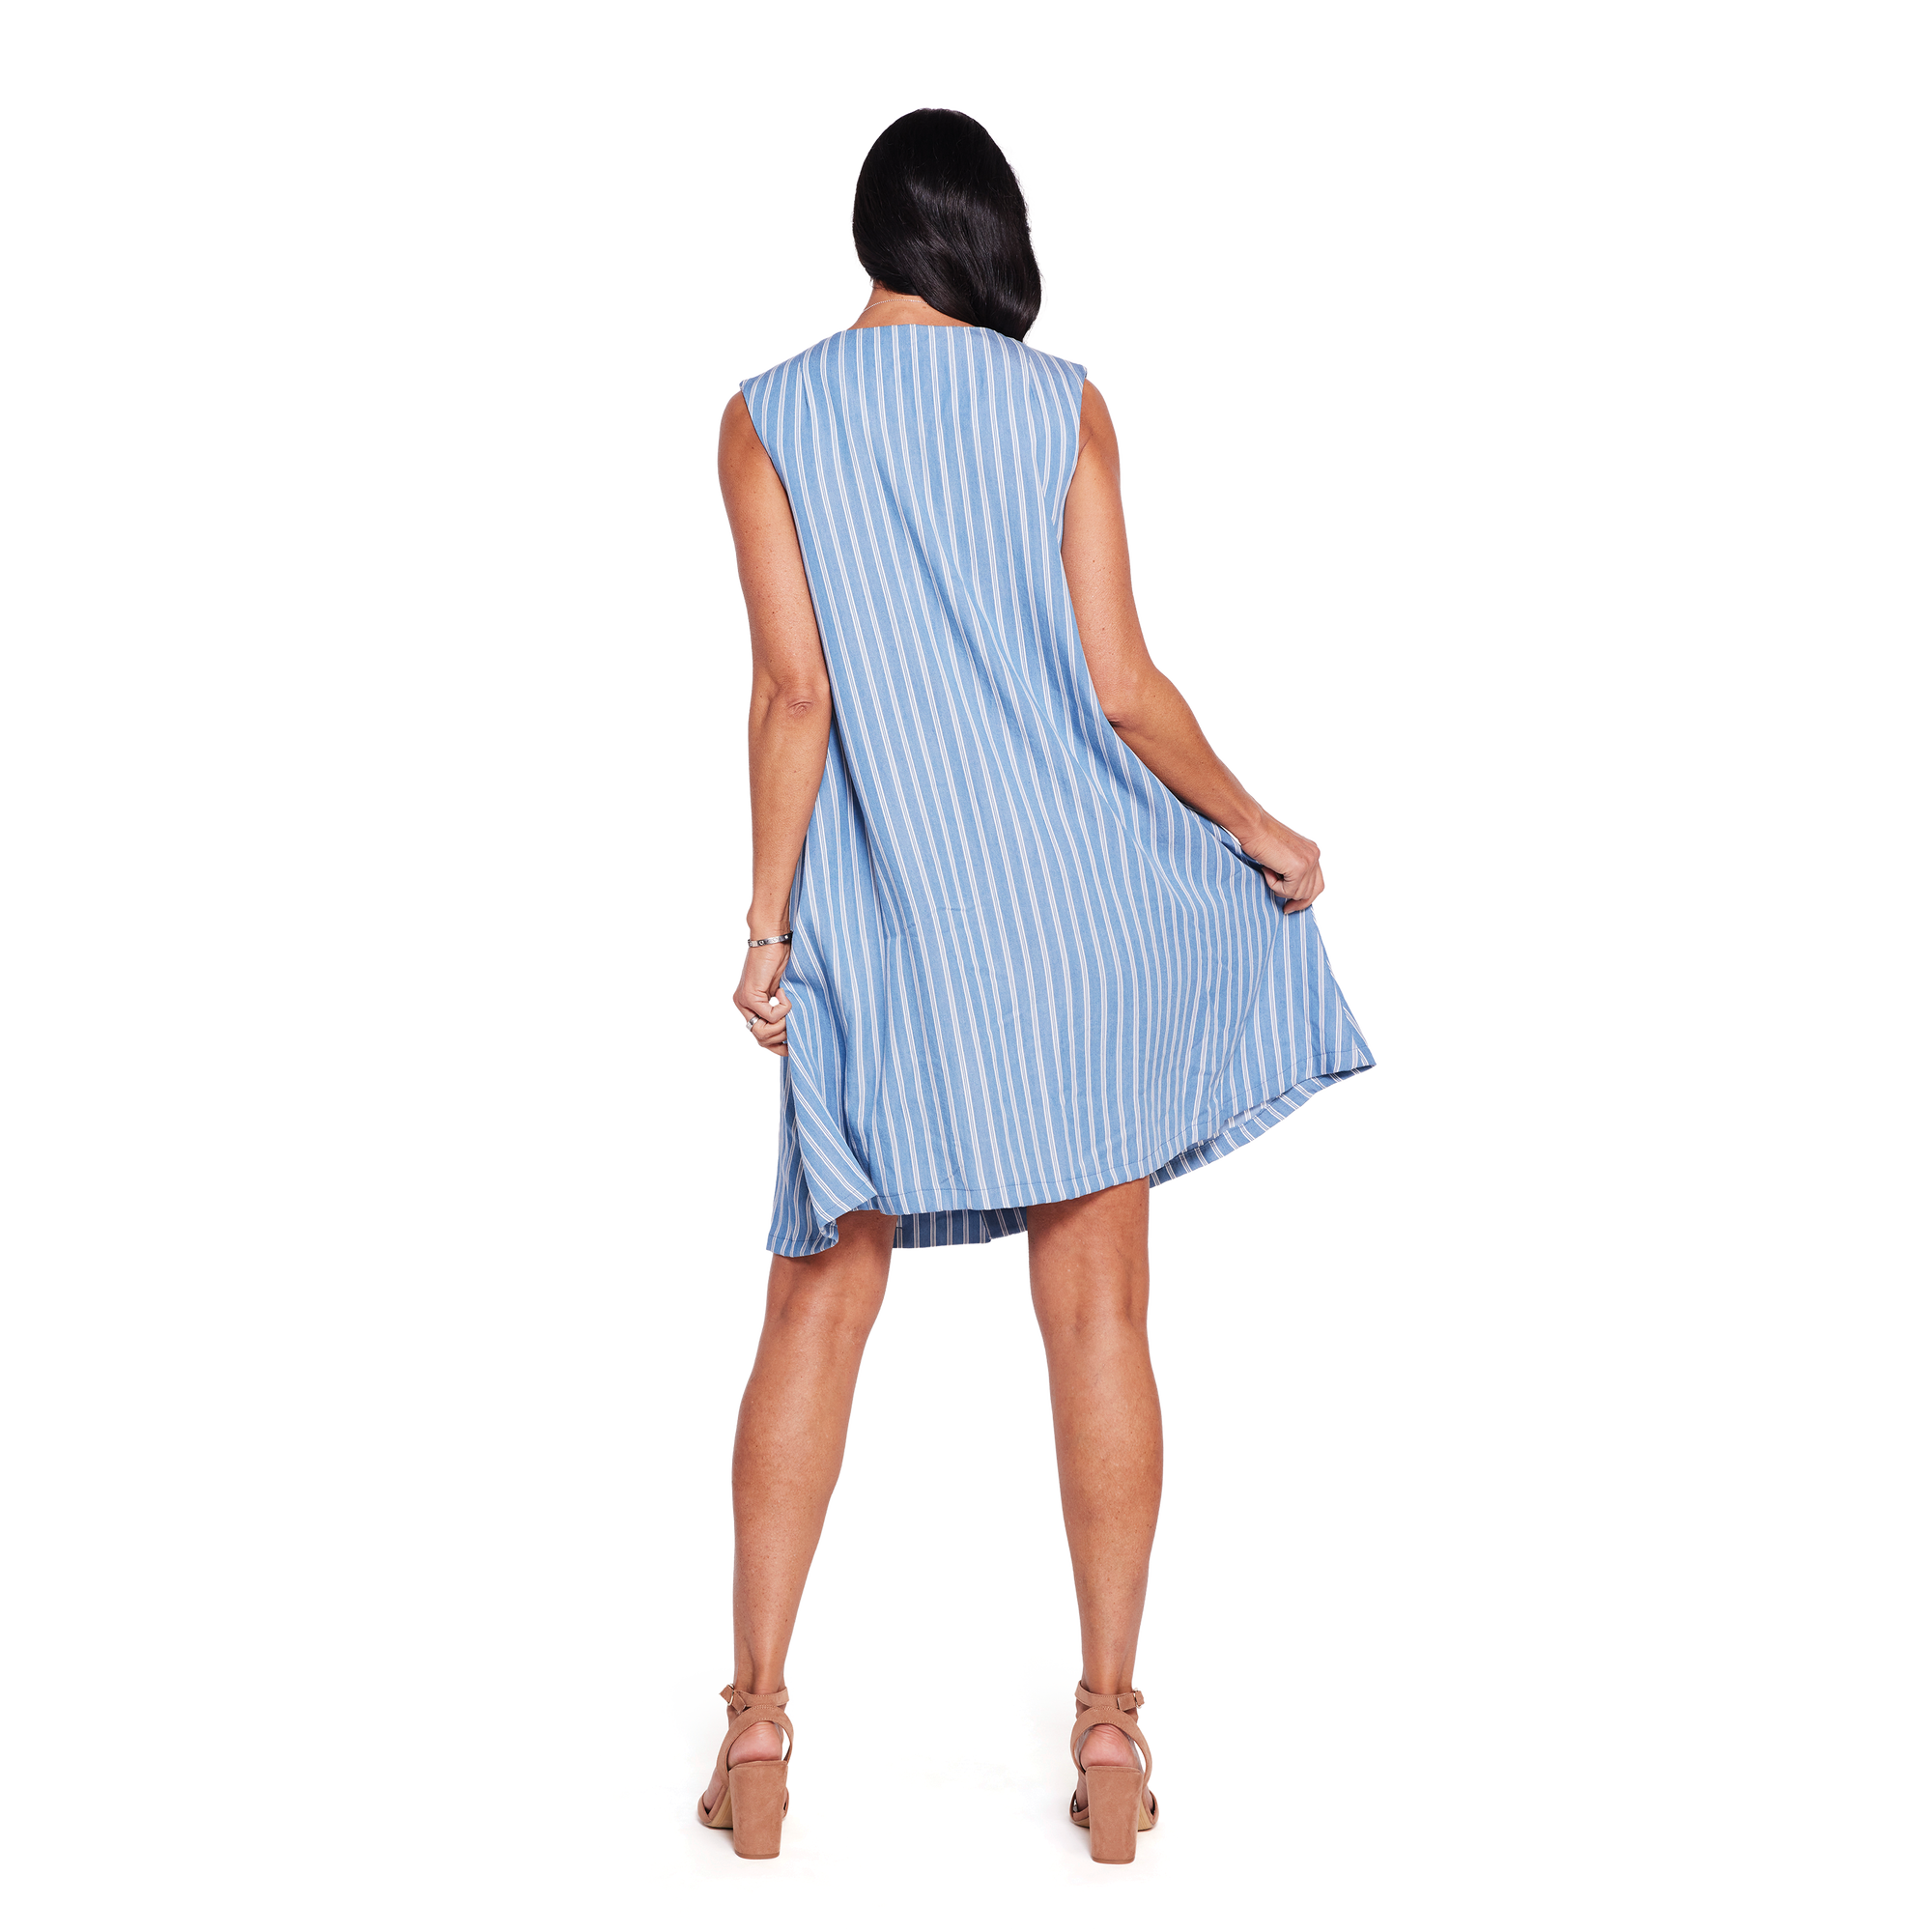 Learn to Sew a Summer Dress Using Ditto Customization and Pattern Projection